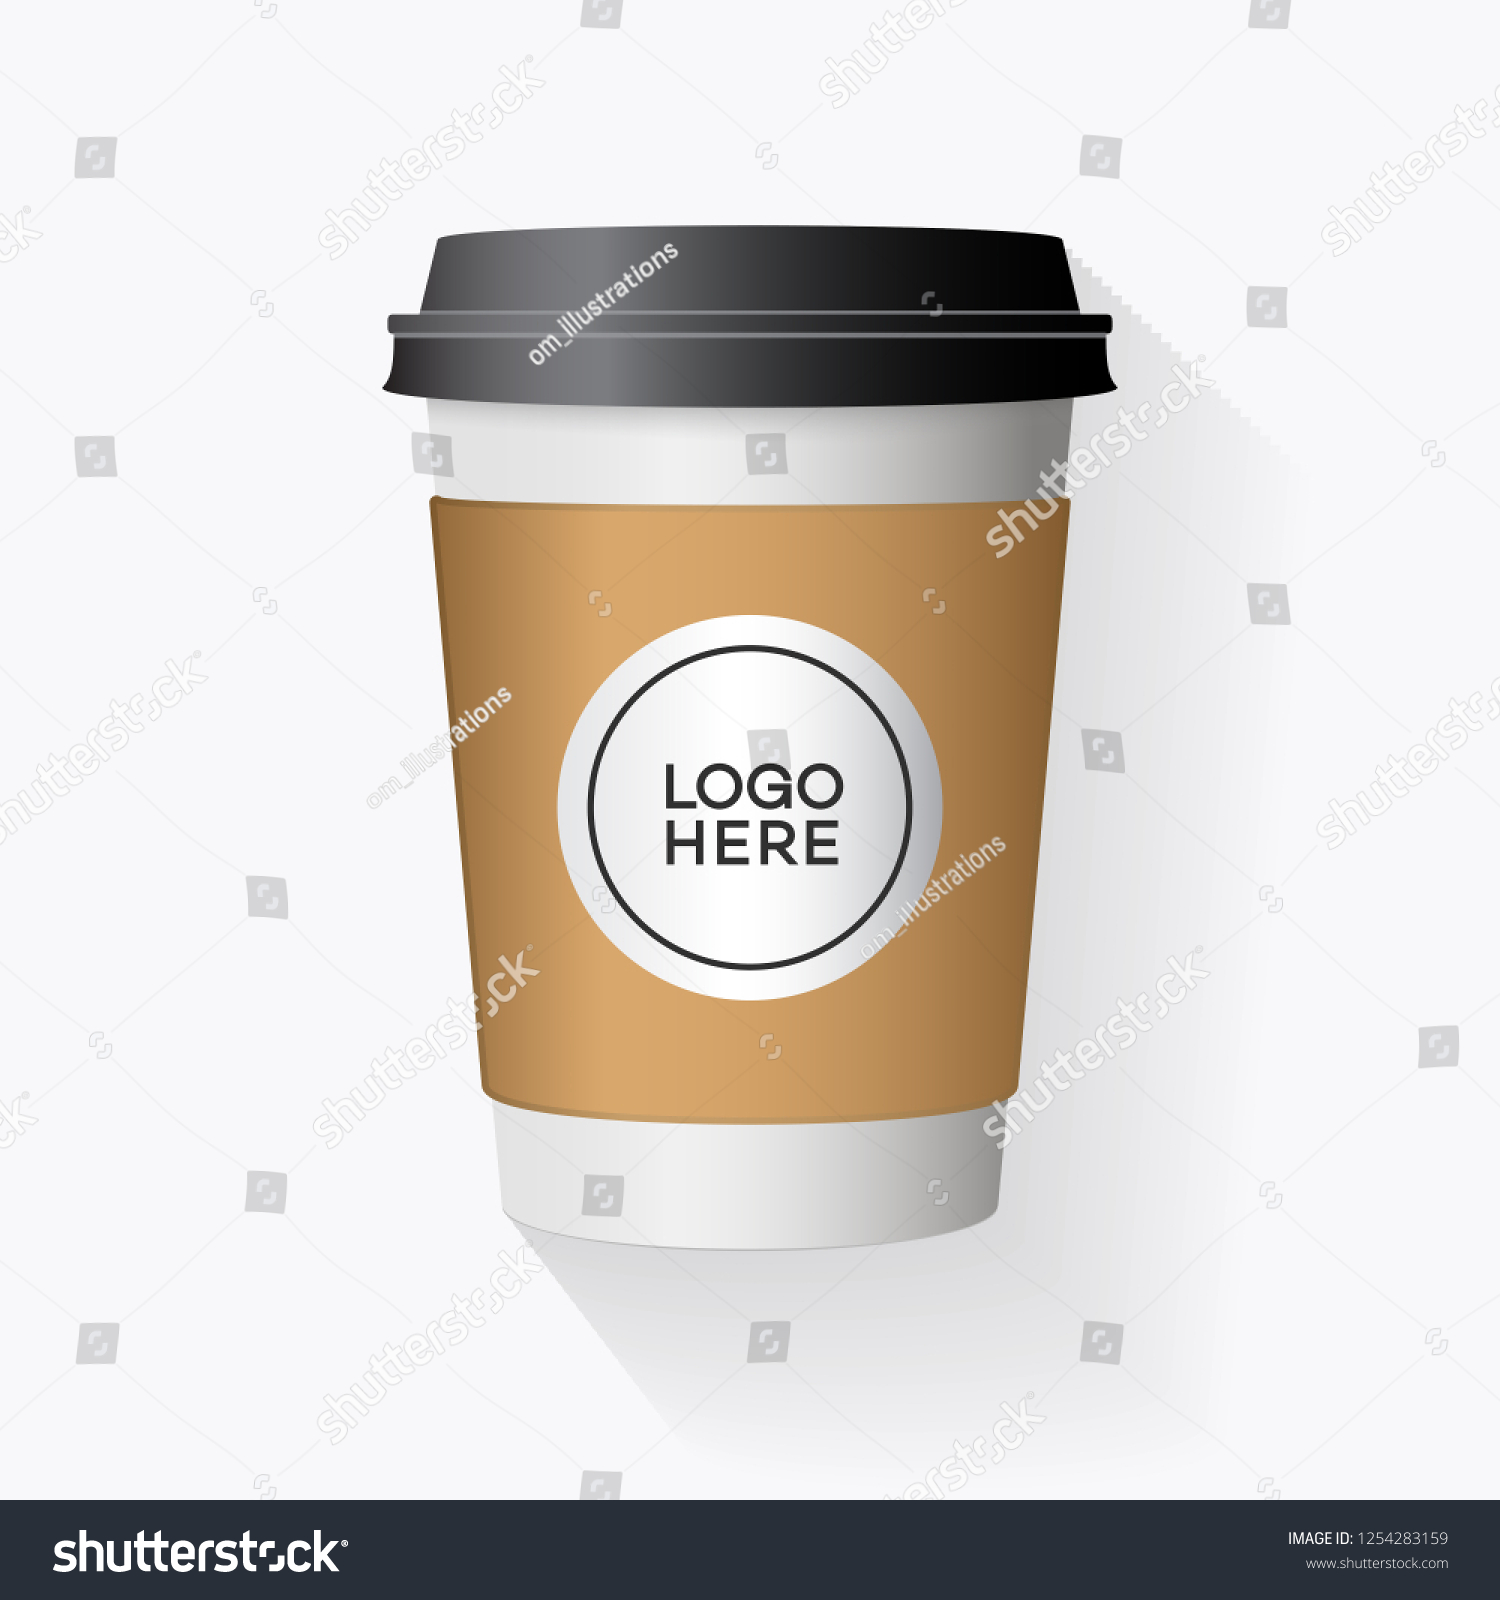 Download Vector Realistic Paper Cup Isolated On Stock Vector Royalty Free 1254283159